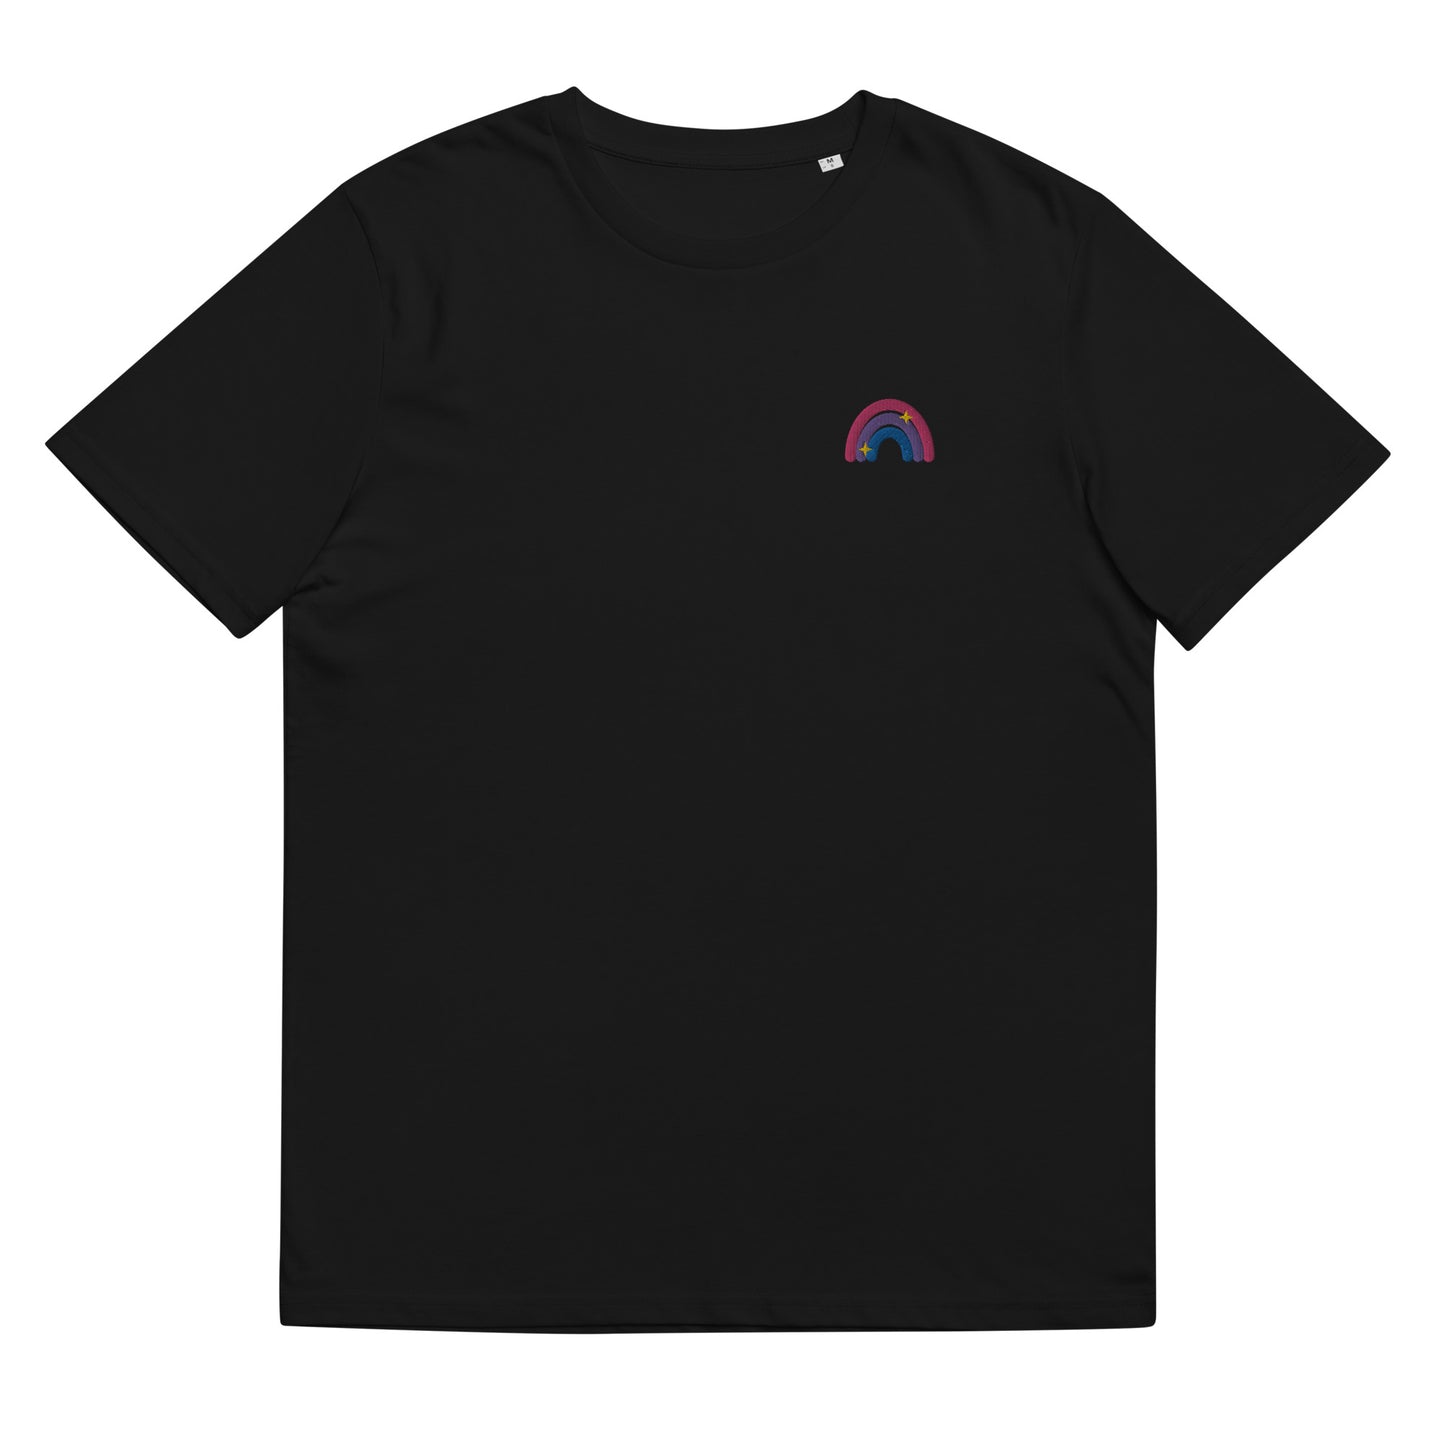 Organic Cotton T-shirt: Bisexual Rainbow Embroidery